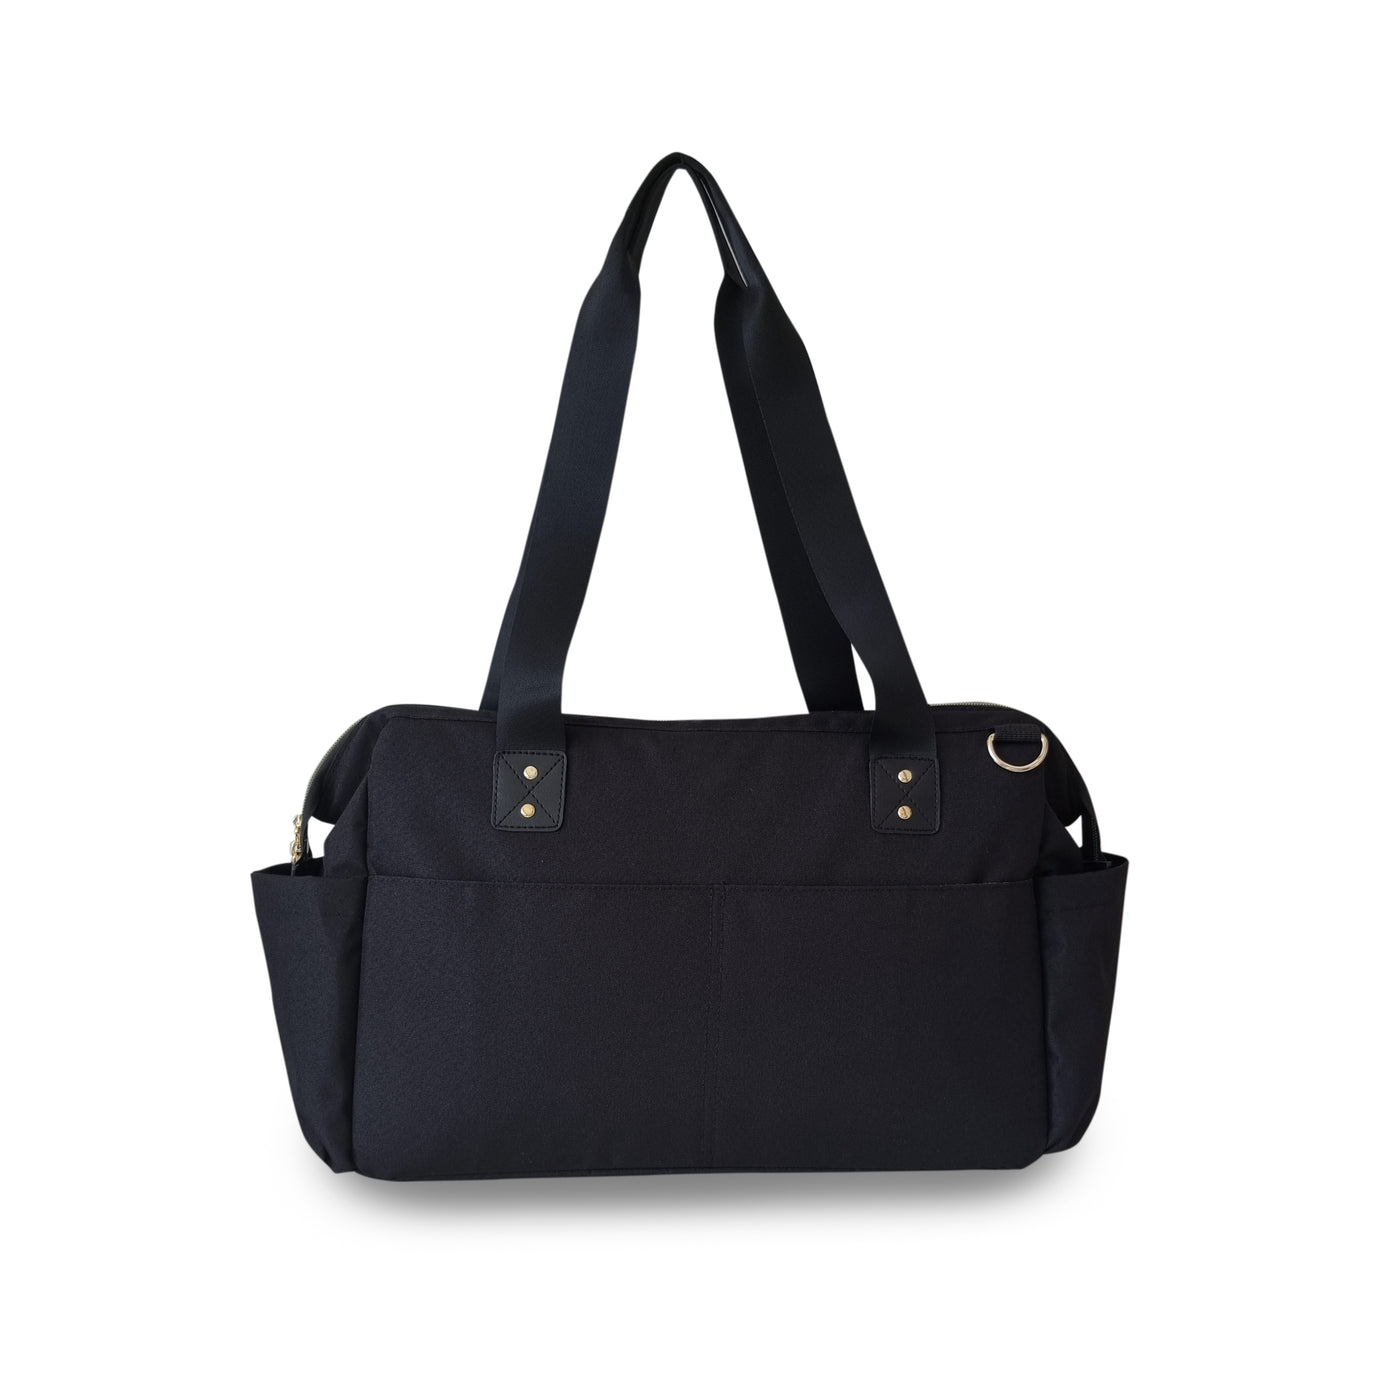 PLUM Tote Bag with Change Mat - Black